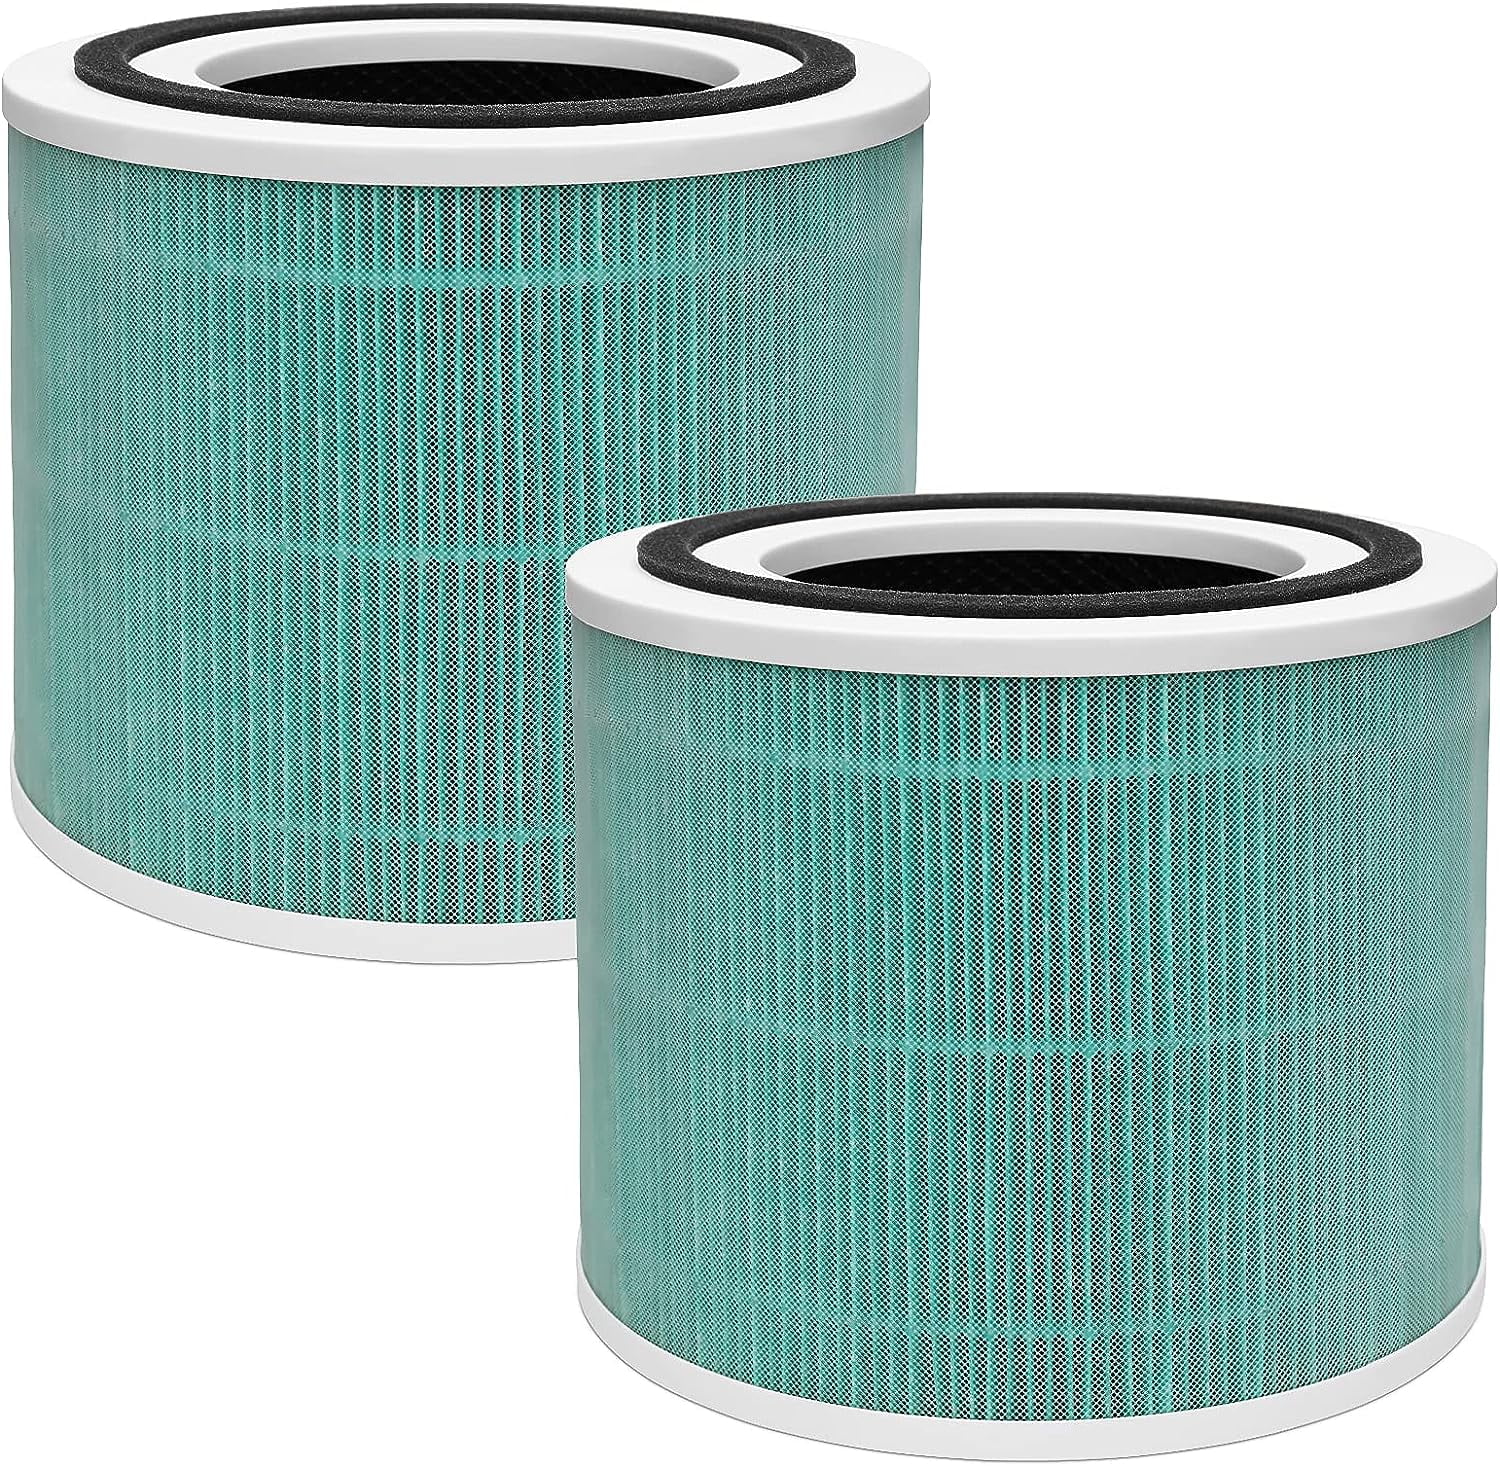 H13 True HEPA Replacement Filter, Compatible Levoit LV-H132 Air Purifier  2-Pack